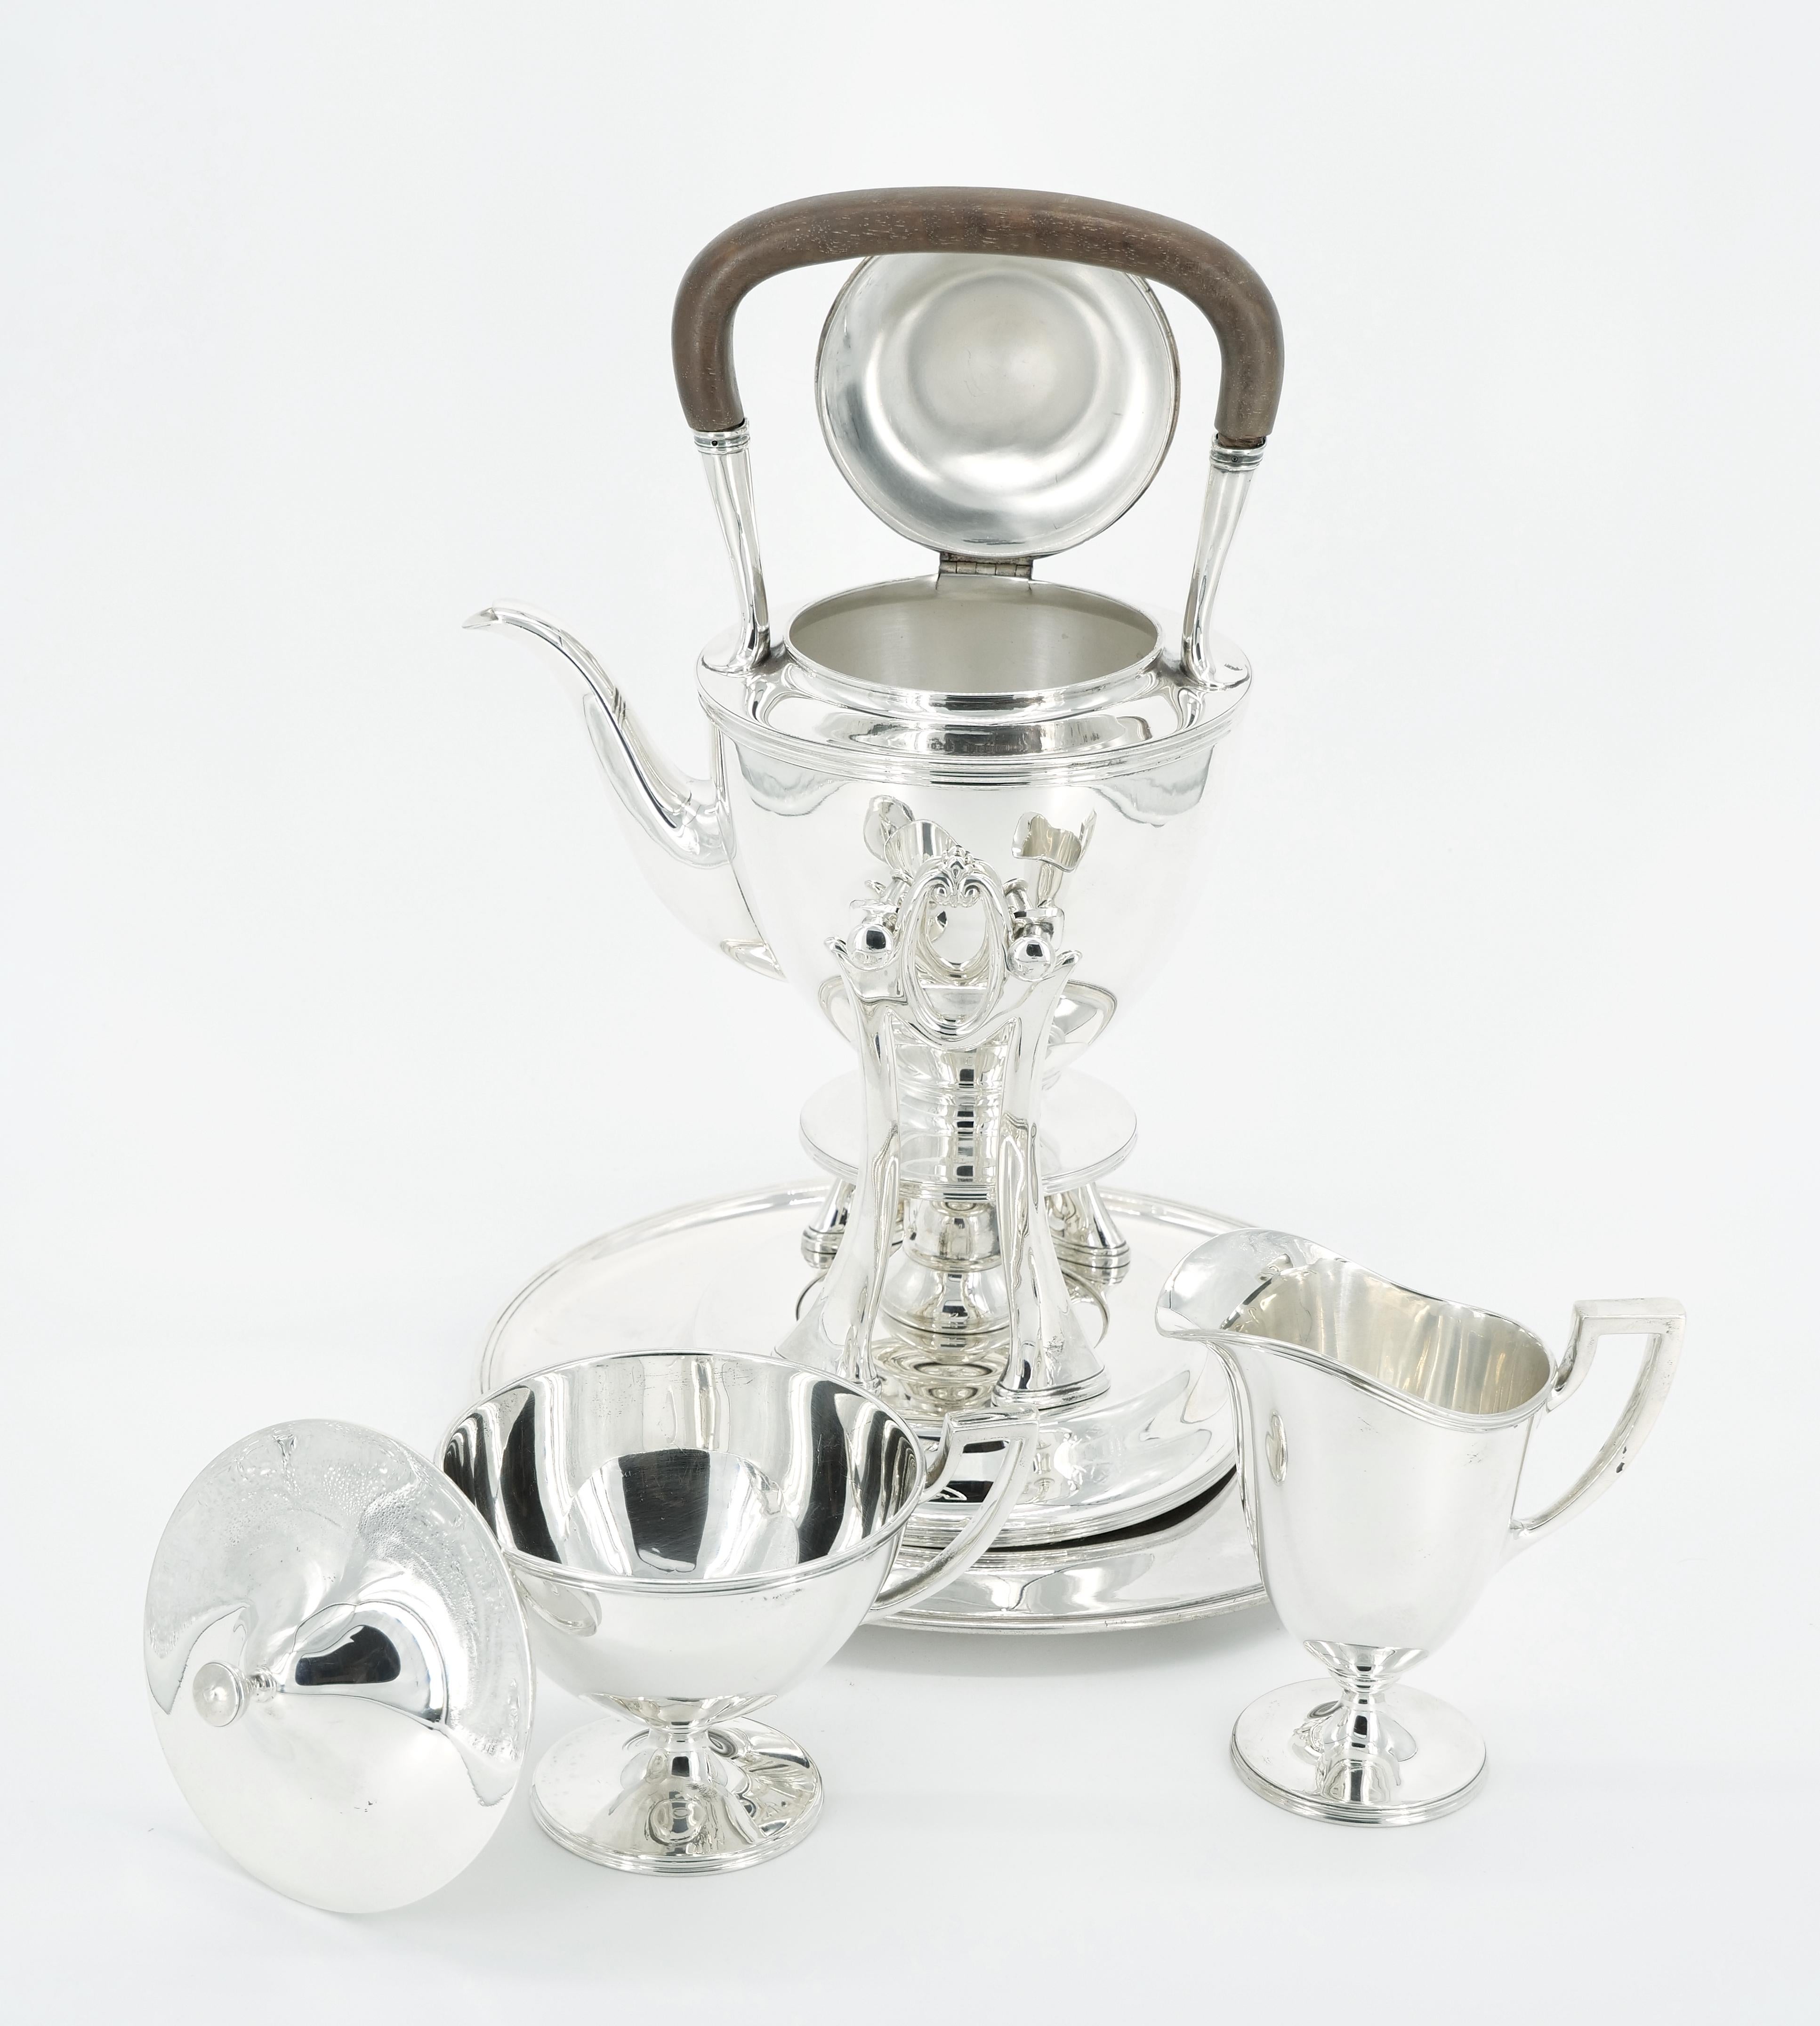 Indulge in the timeless elegance of this Exquisite early 20th-century Tiffany Sterling Silver Classical Style Four-Piece Tea/Coffee Service. Each piece is a testament to Tiffany's renowned craftsmanship, featuring a clean and classic line design